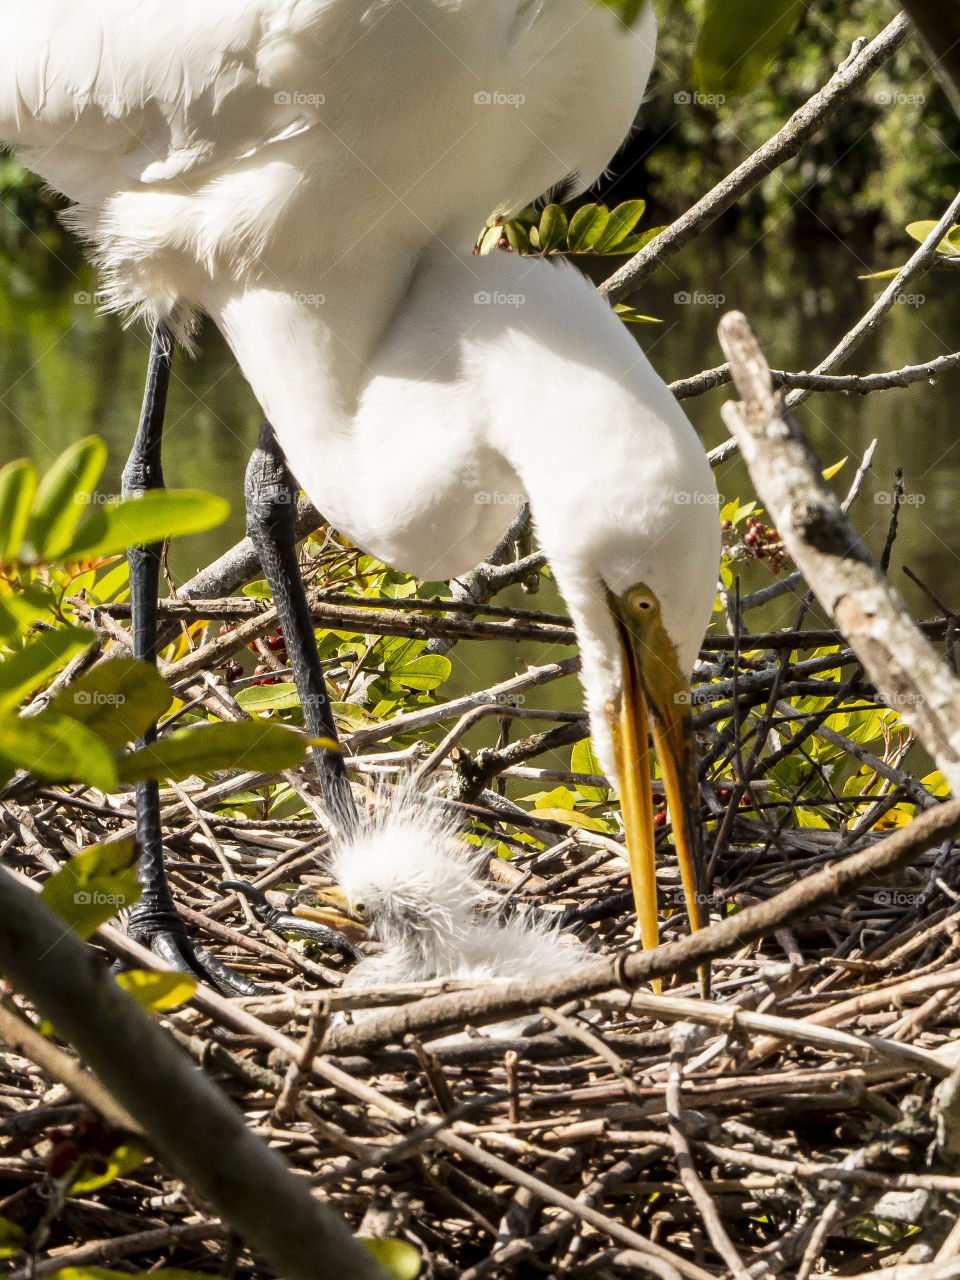 Baby Snowy Egret with Mom in early Spring